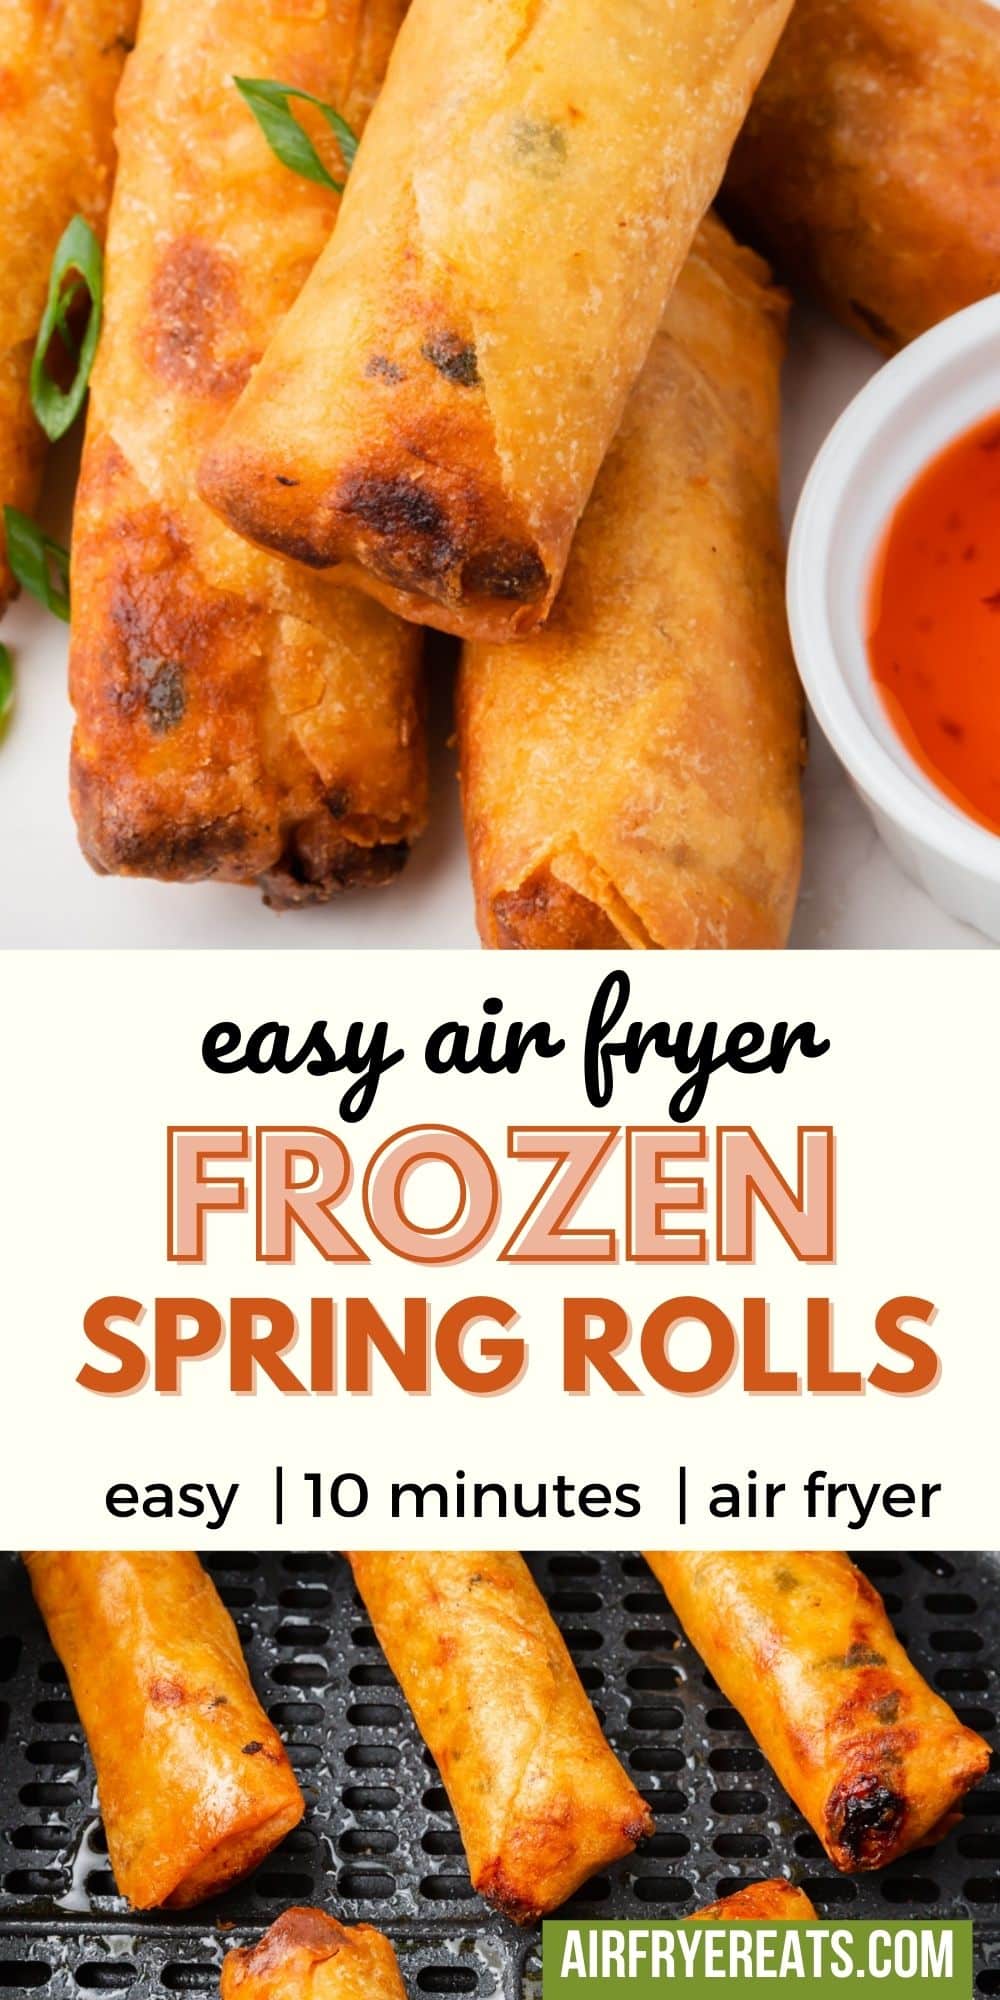 In just 10 minutes you can make crispy, delicious, frozen spring rolls in the air fryer! Skip takeout - make yourself a tasty snack at home. via @vegetarianmamma